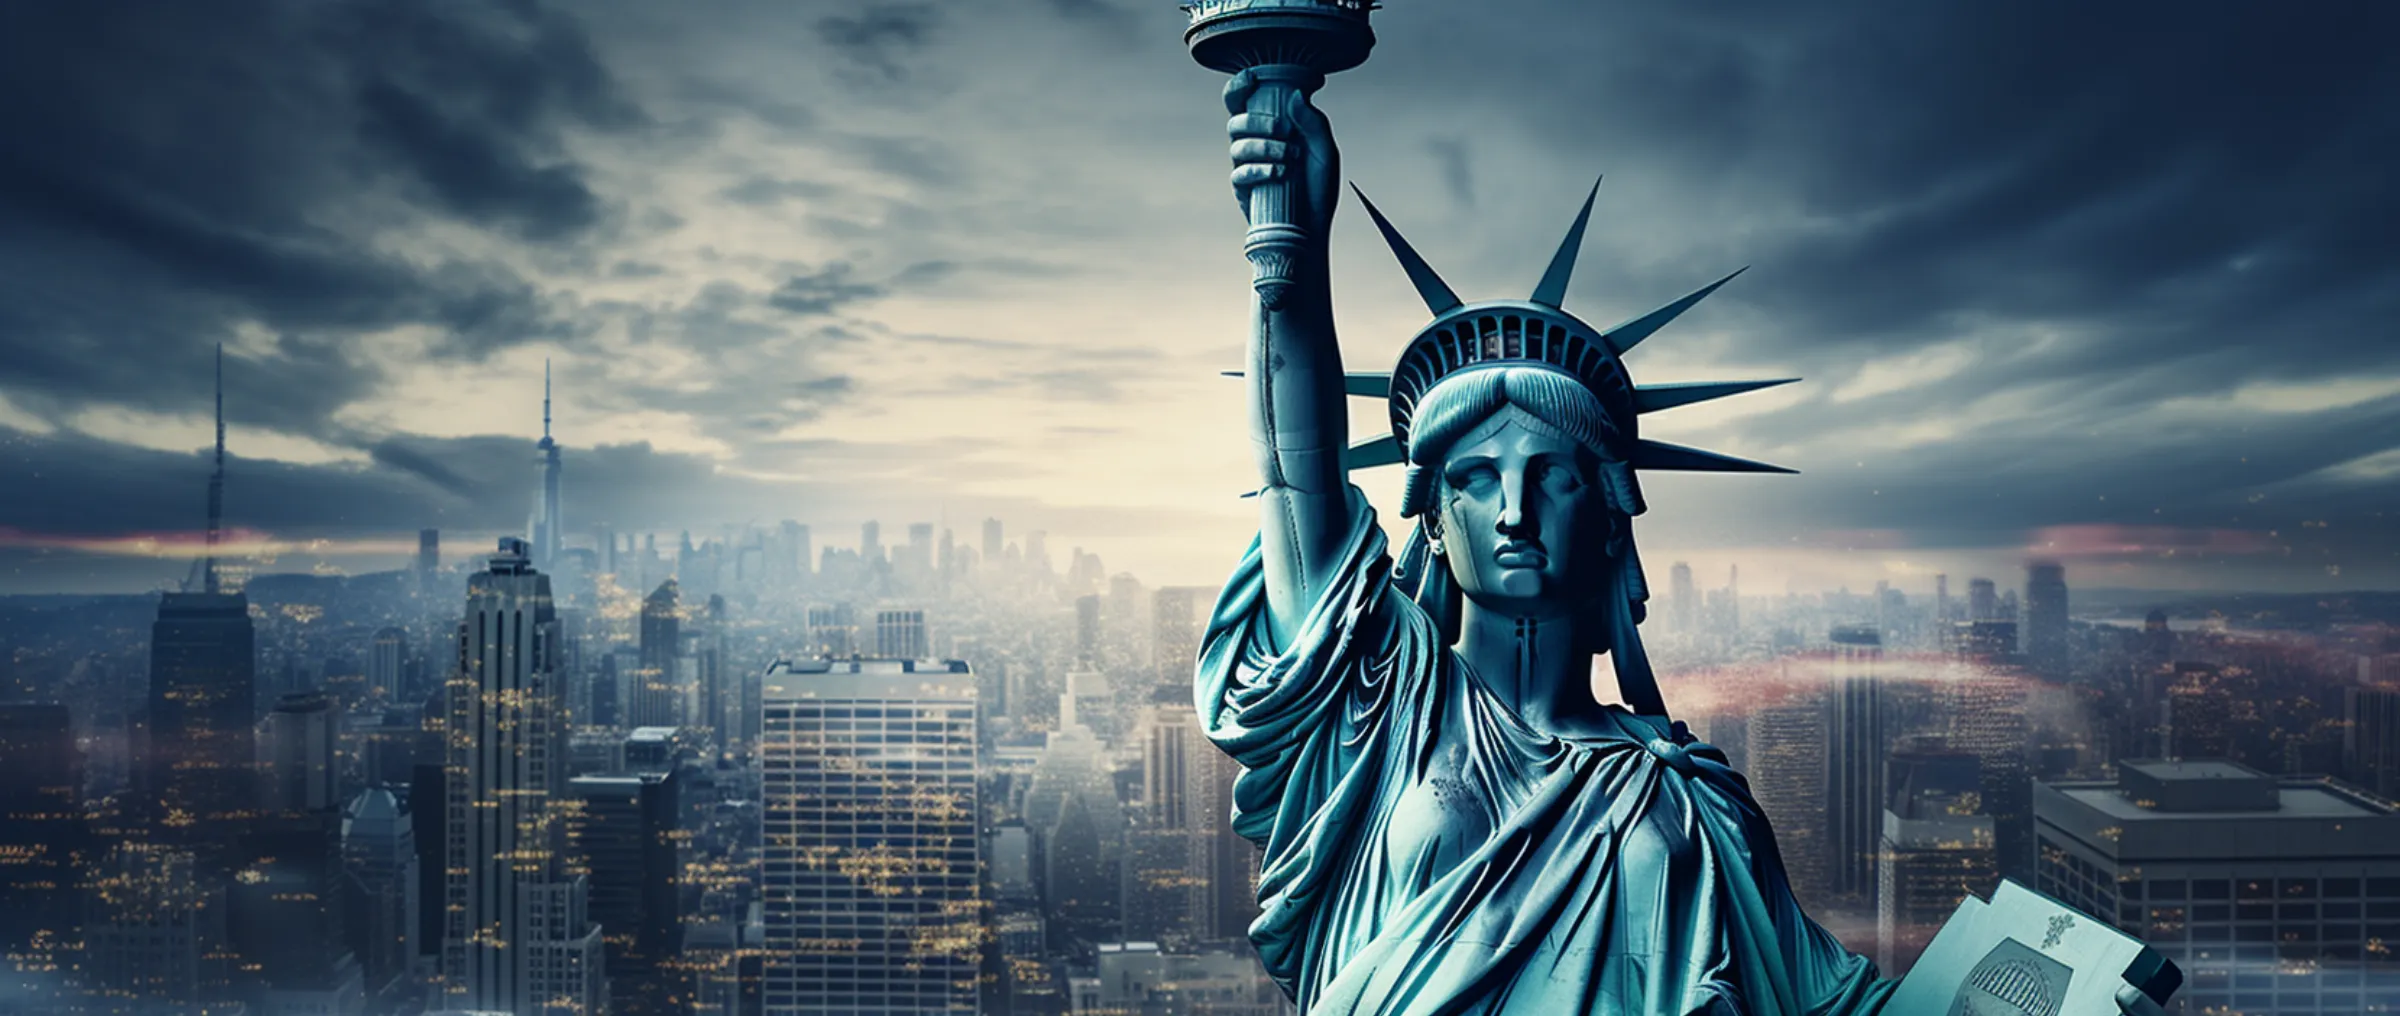 KuCoin settles New York lawsuit with $22 million exit